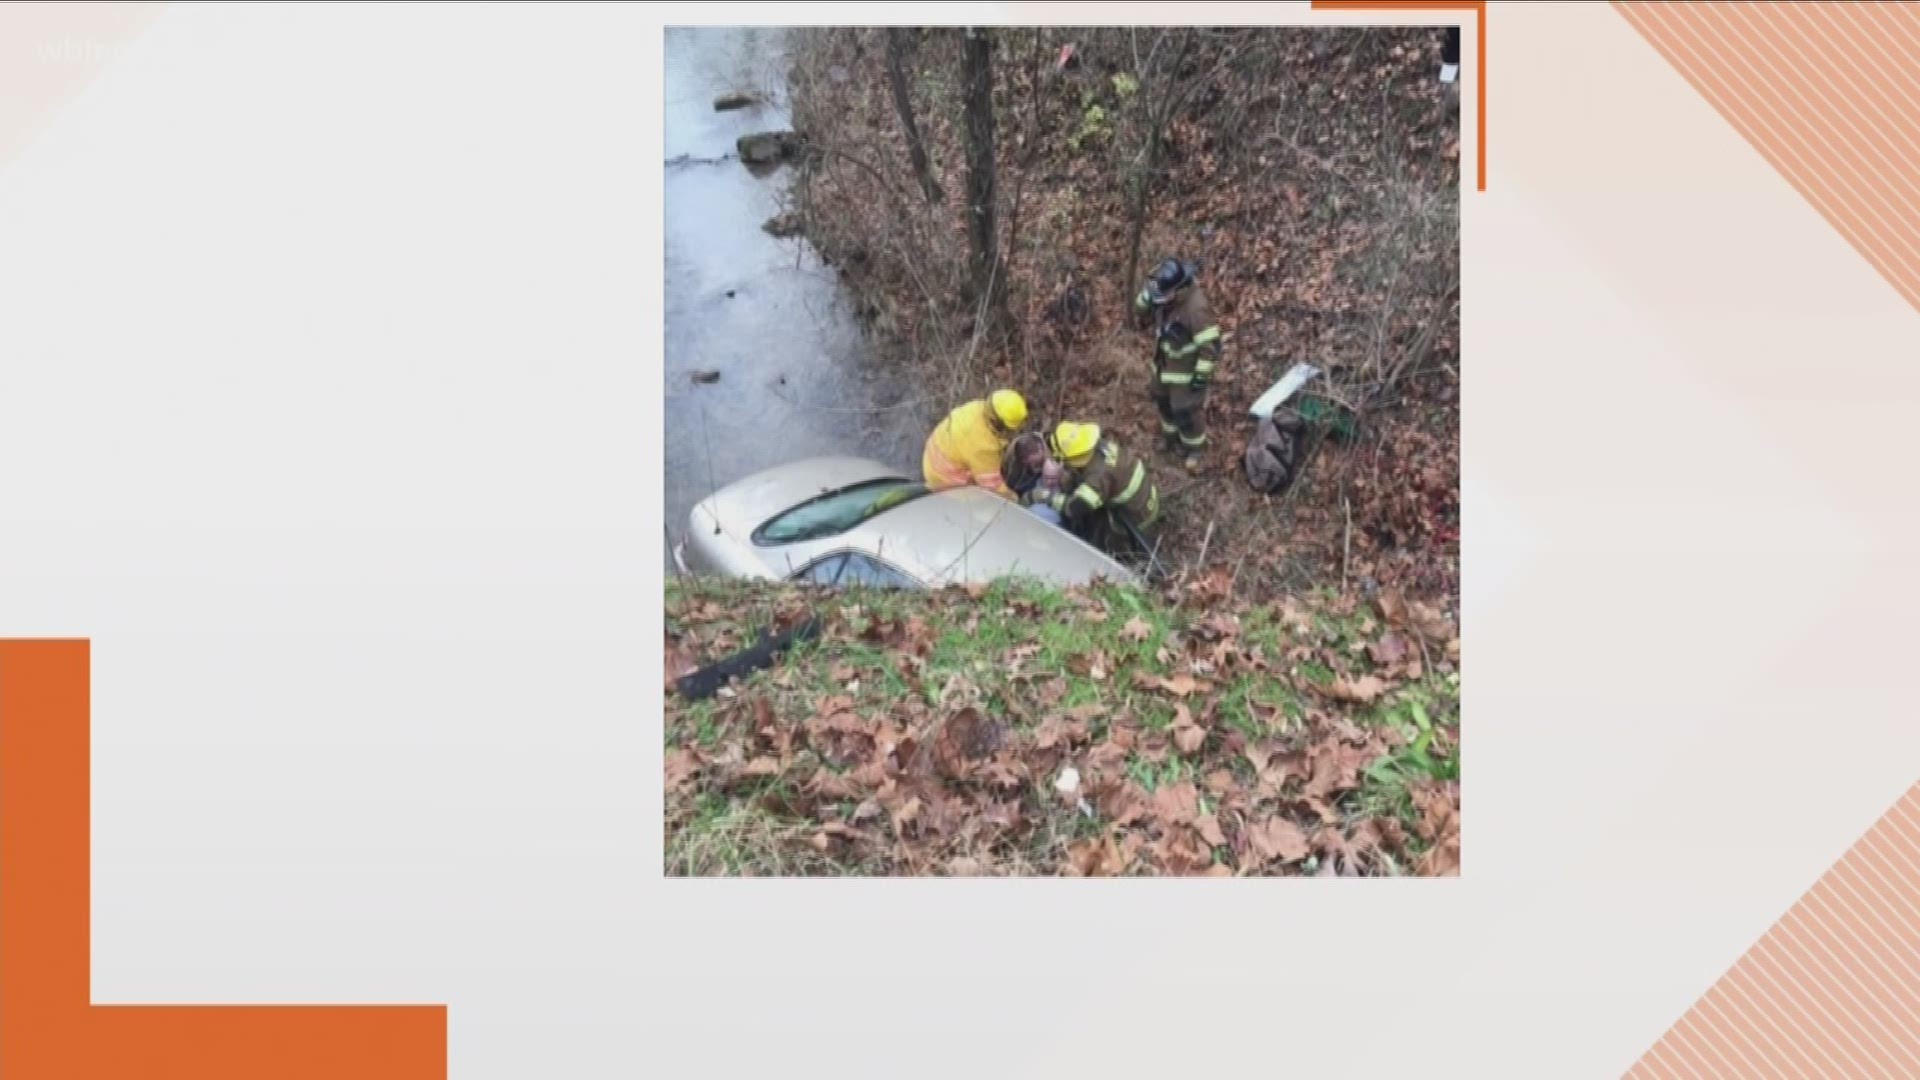 An elderly couple is recovering after rescue crews pulled their car from a creek.